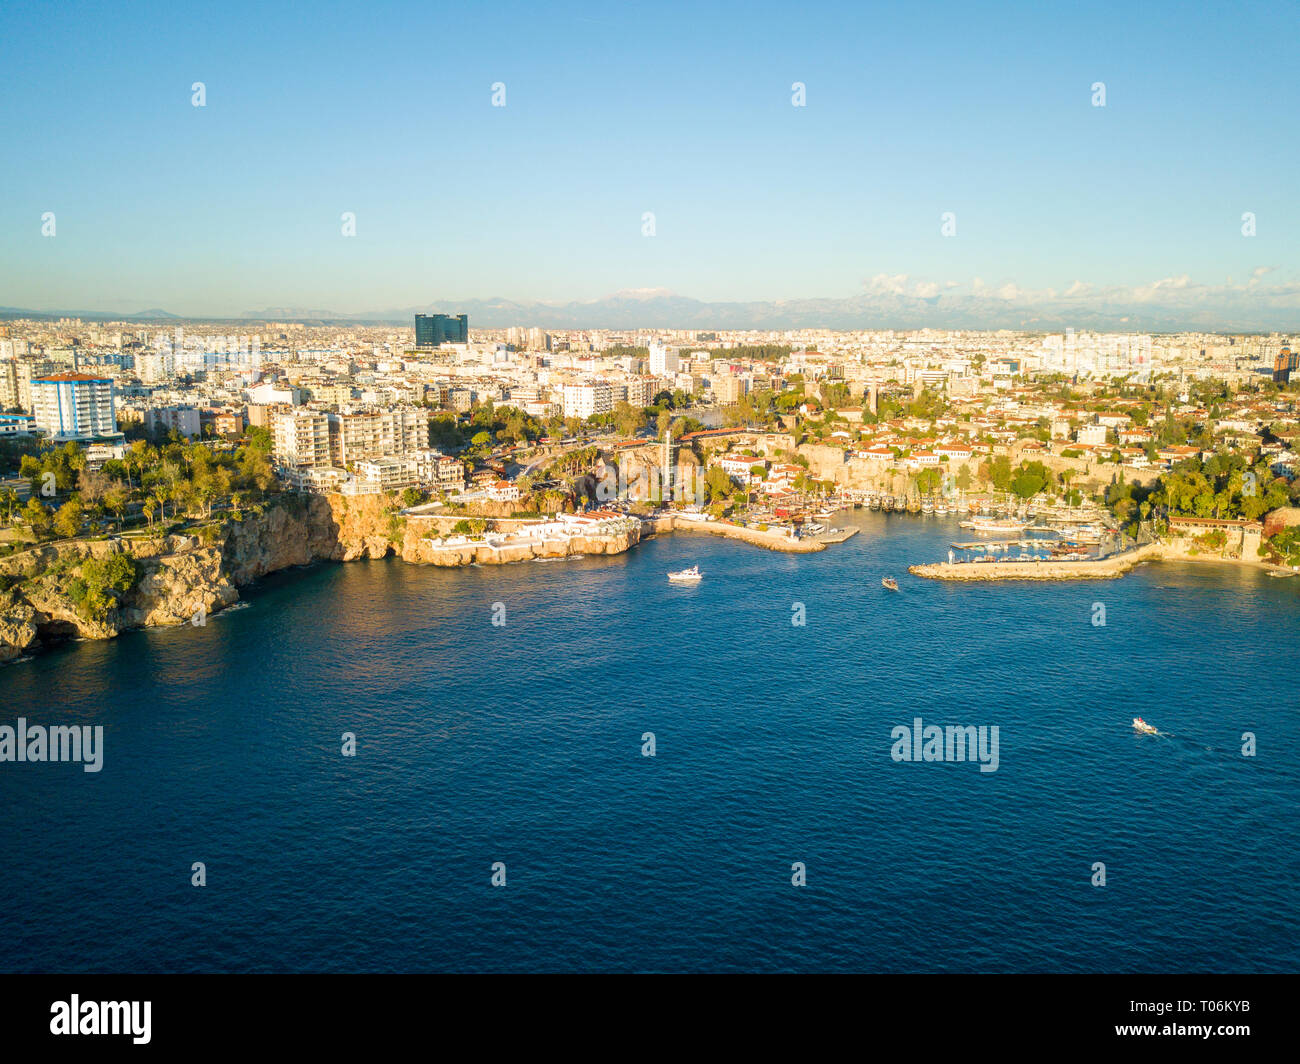 Aerial drone view of boats going into Kaleici old town harbor with cityscape and mountain background in Antalya, Turkey Stock Photo